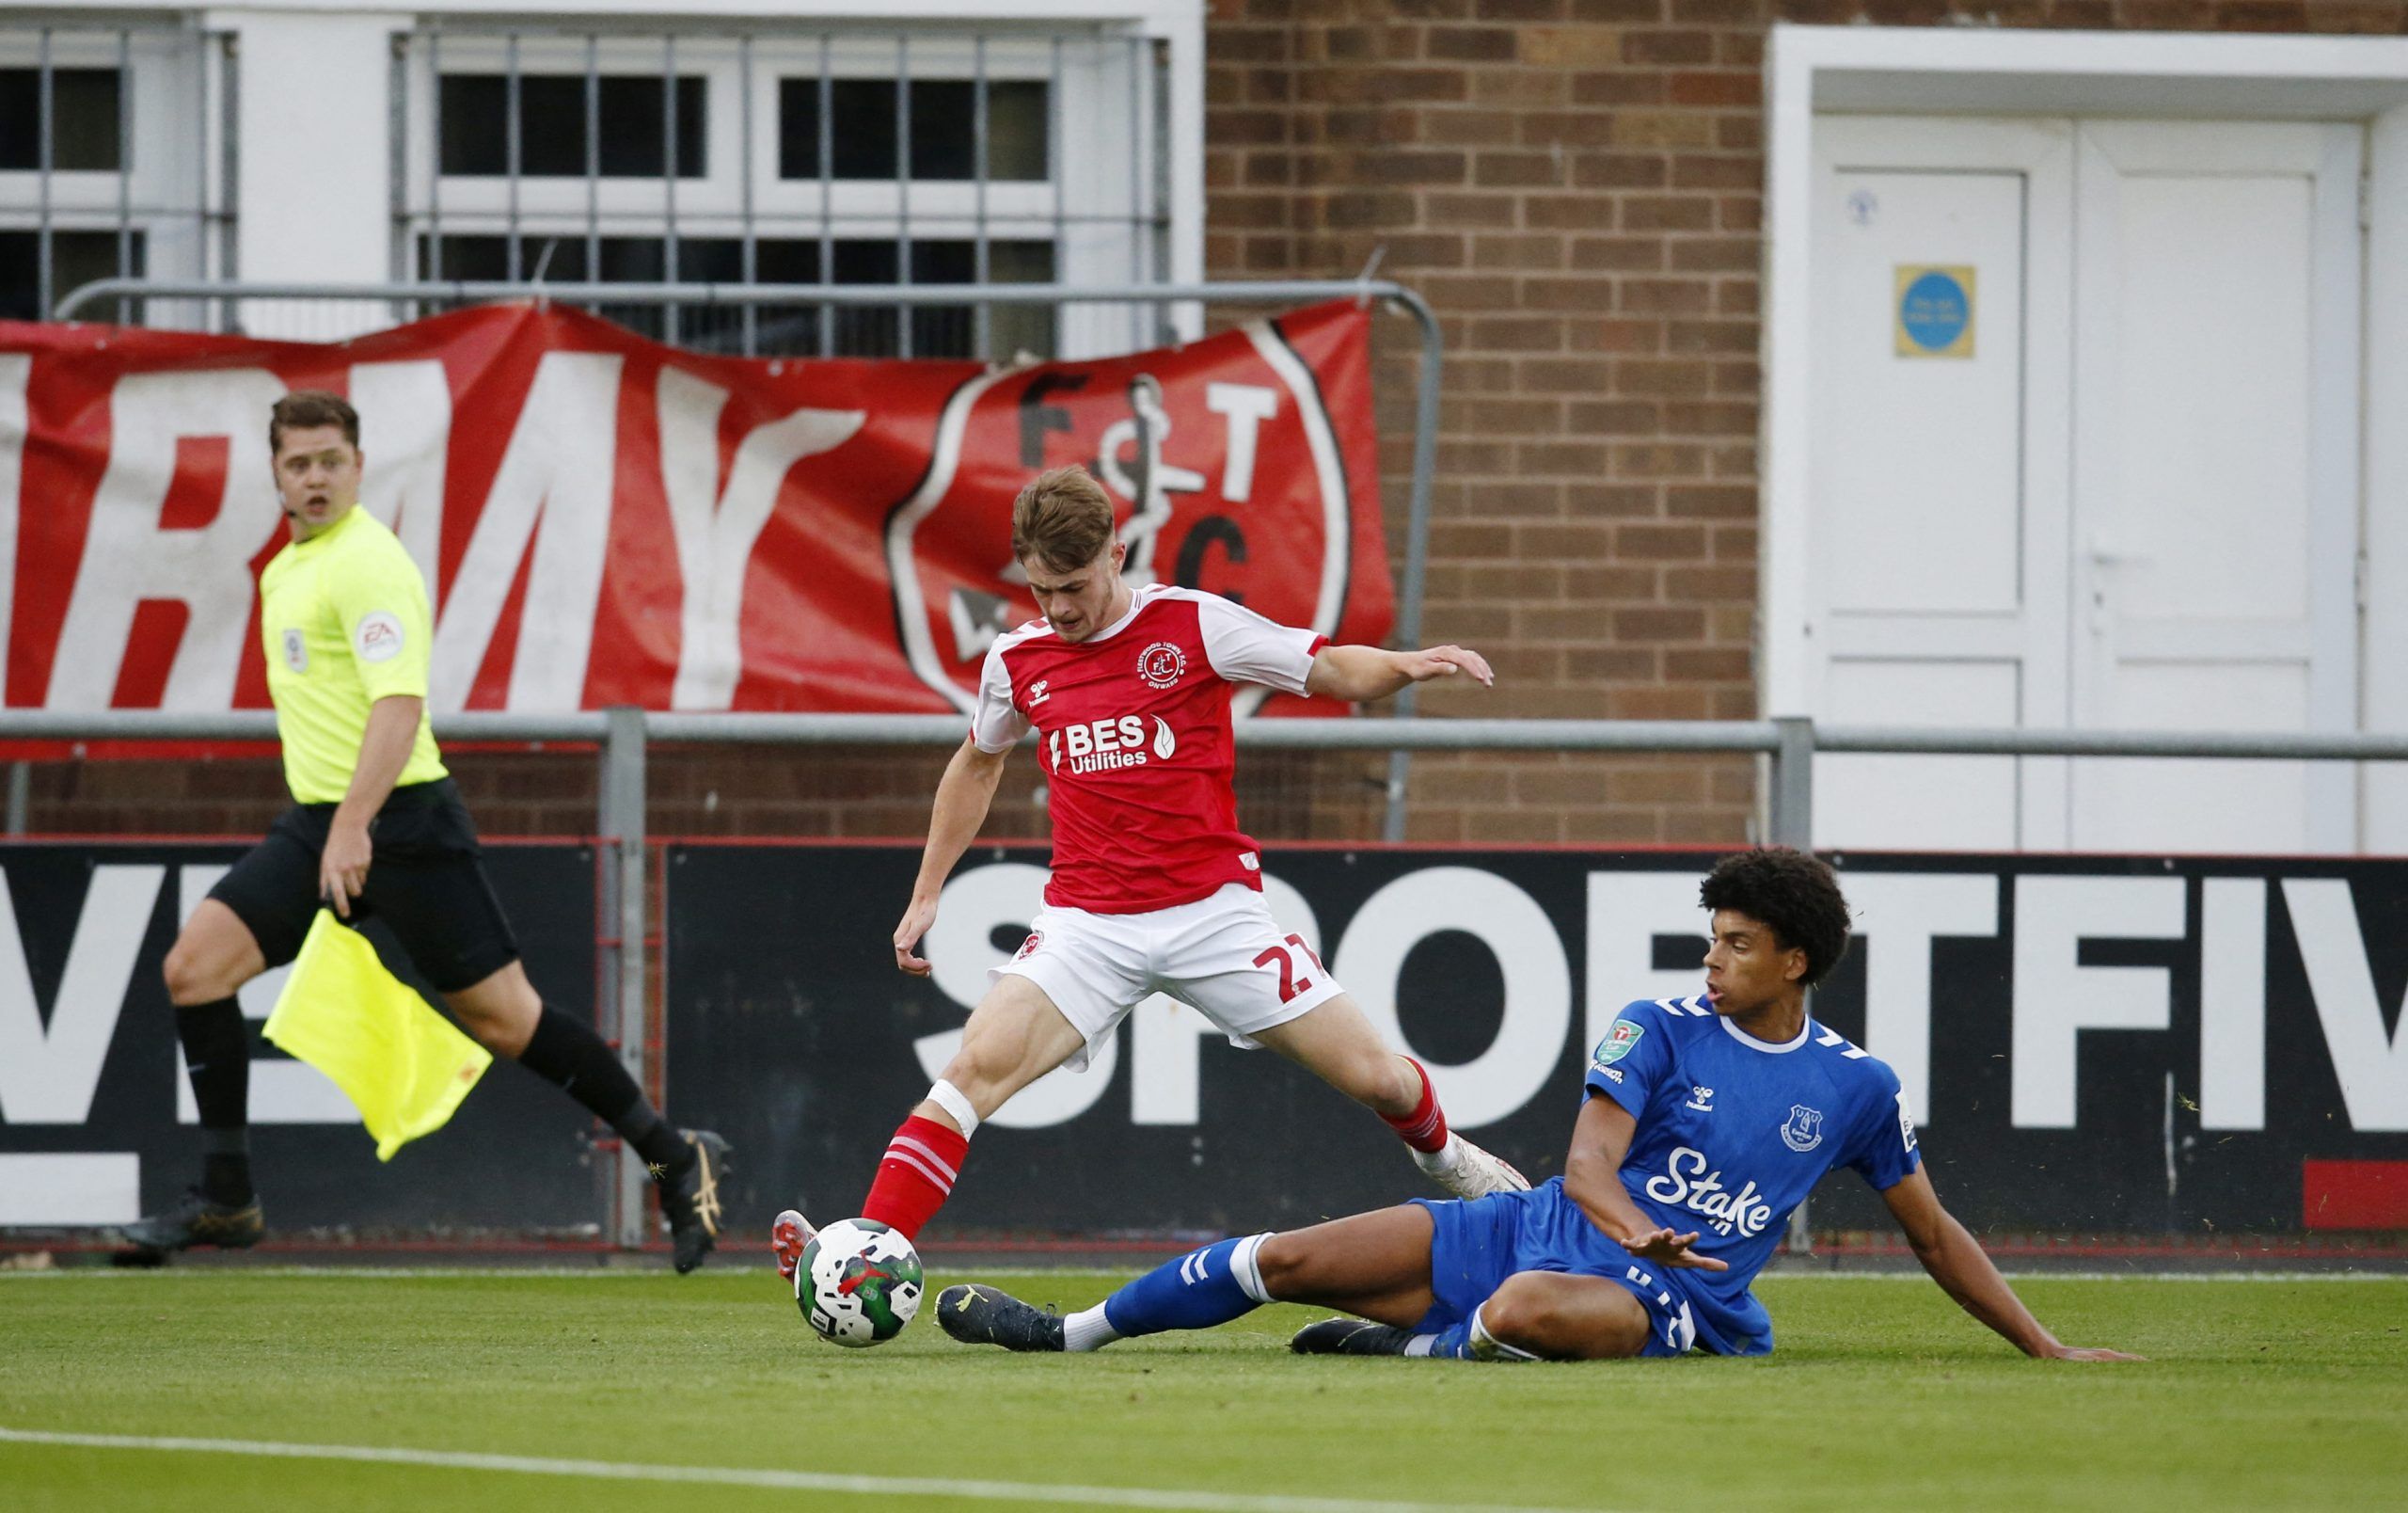 Soccer Football - Carabao Cup Second Round - Fleetwood Town v Everton - Highbury Stadium, Fleetwood, Britain - August 23, 2022 Fleetwood Town's Cian Hayes in action with Everton's Reece Welch Action Images via Reuters/Ed Sykes EDITORIAL USE ONLY. No use with unauthorized audio, video, data, fixture lists, club/league logos or 'live' services. Online in-match use limited to 75 images, no video emulation. No use in betting, games or single club /league/player publications.  Please contact your acc